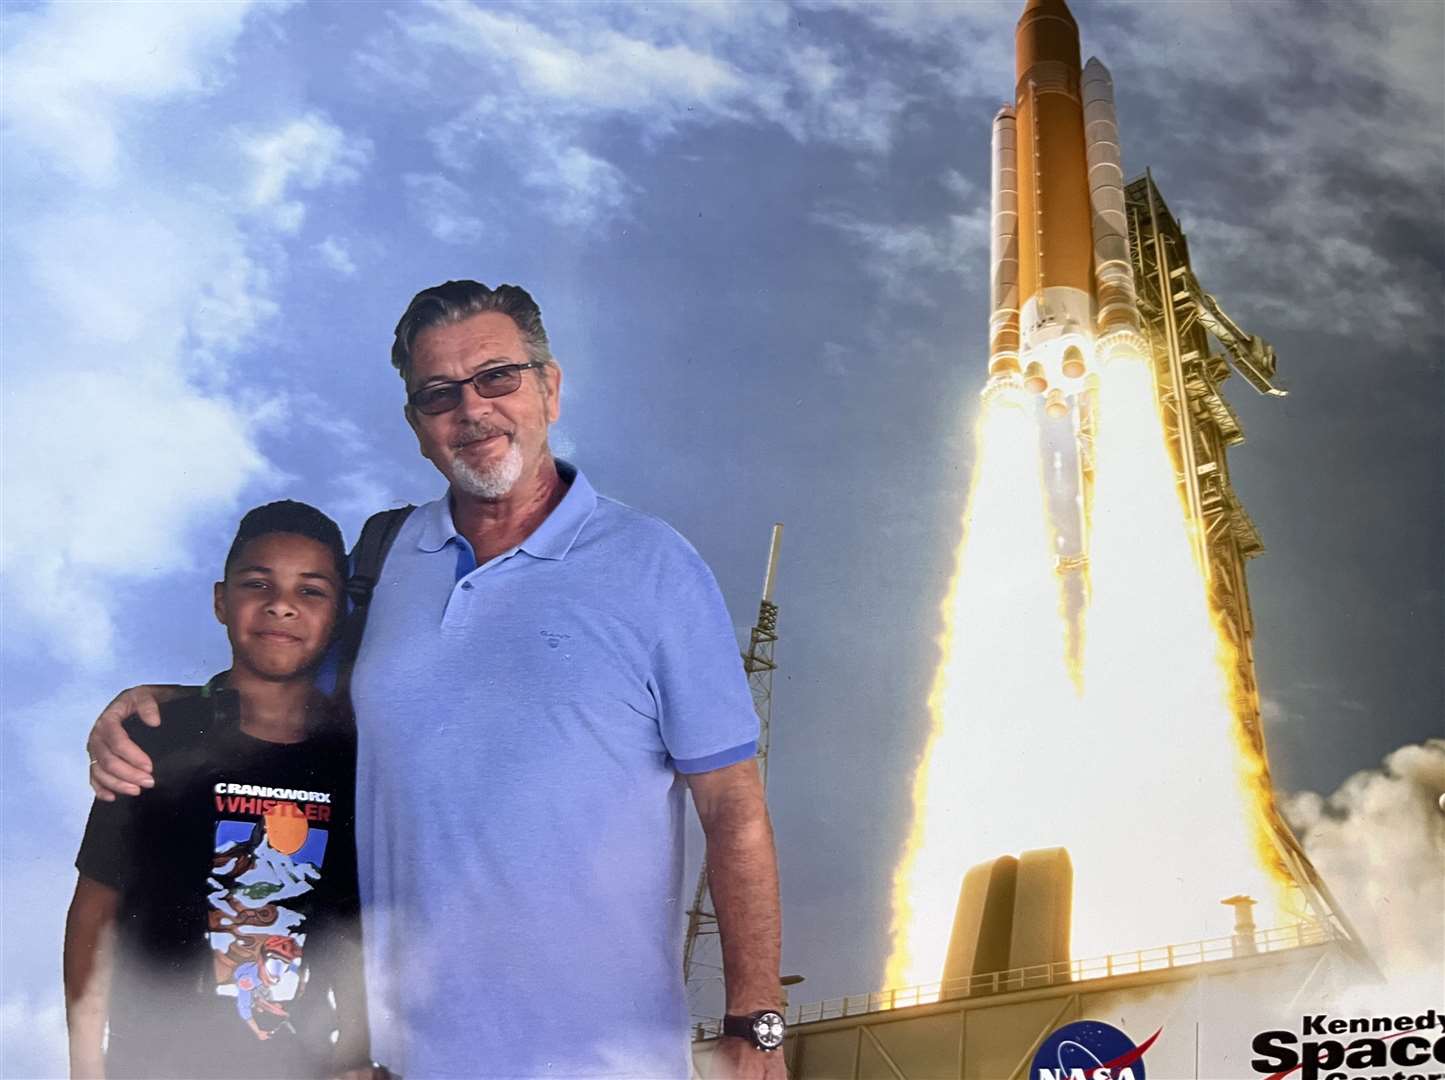 Mum Kristy says Zach, seen here with his dad, has always been fascinated by engineering, and wants to work for NASA in the future. Picture: Kristy Stanley